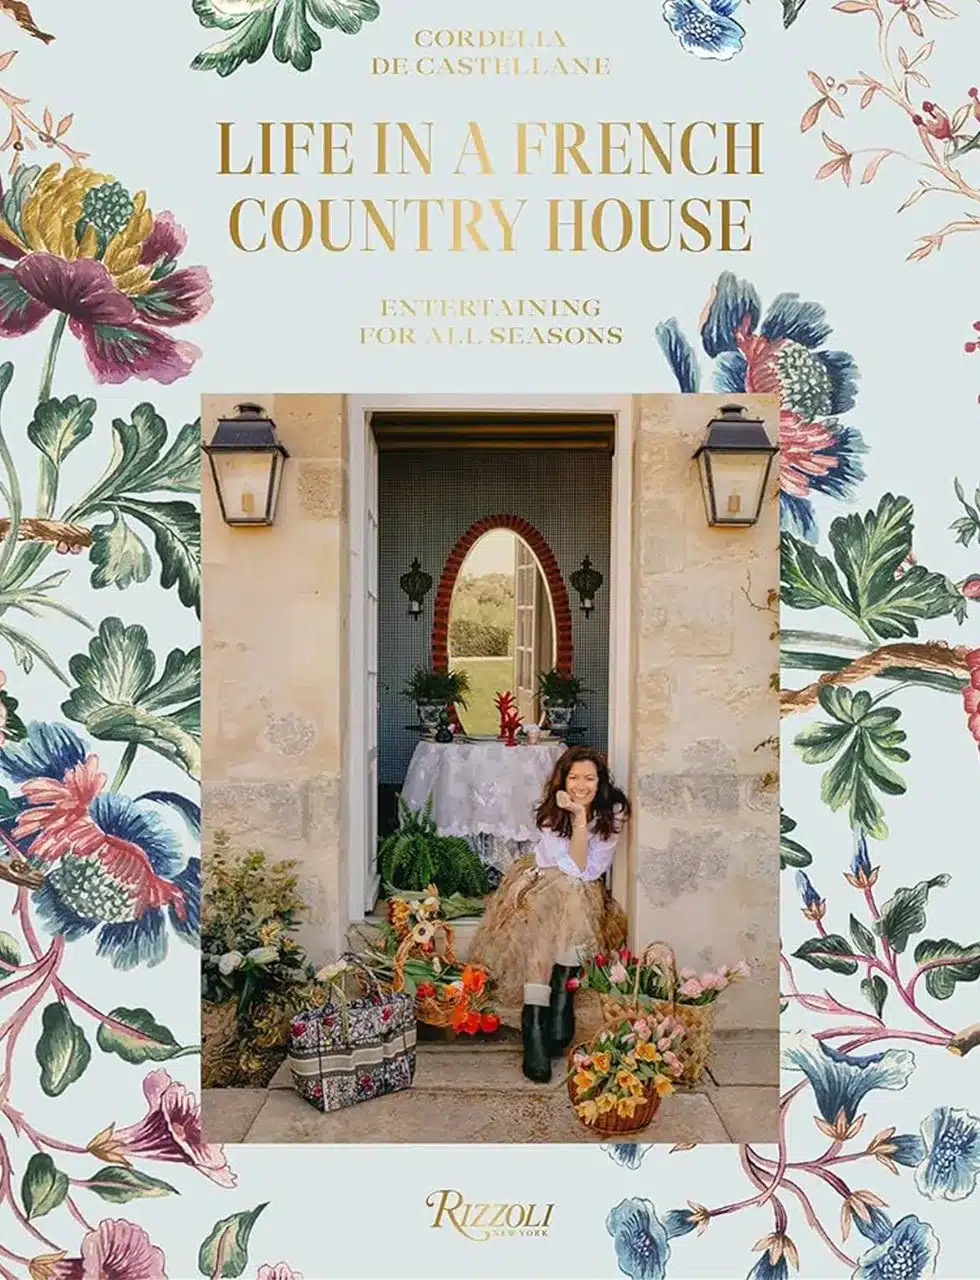 Life in a french country house by cordelia de castellane exemplifies katharine pooleys style well